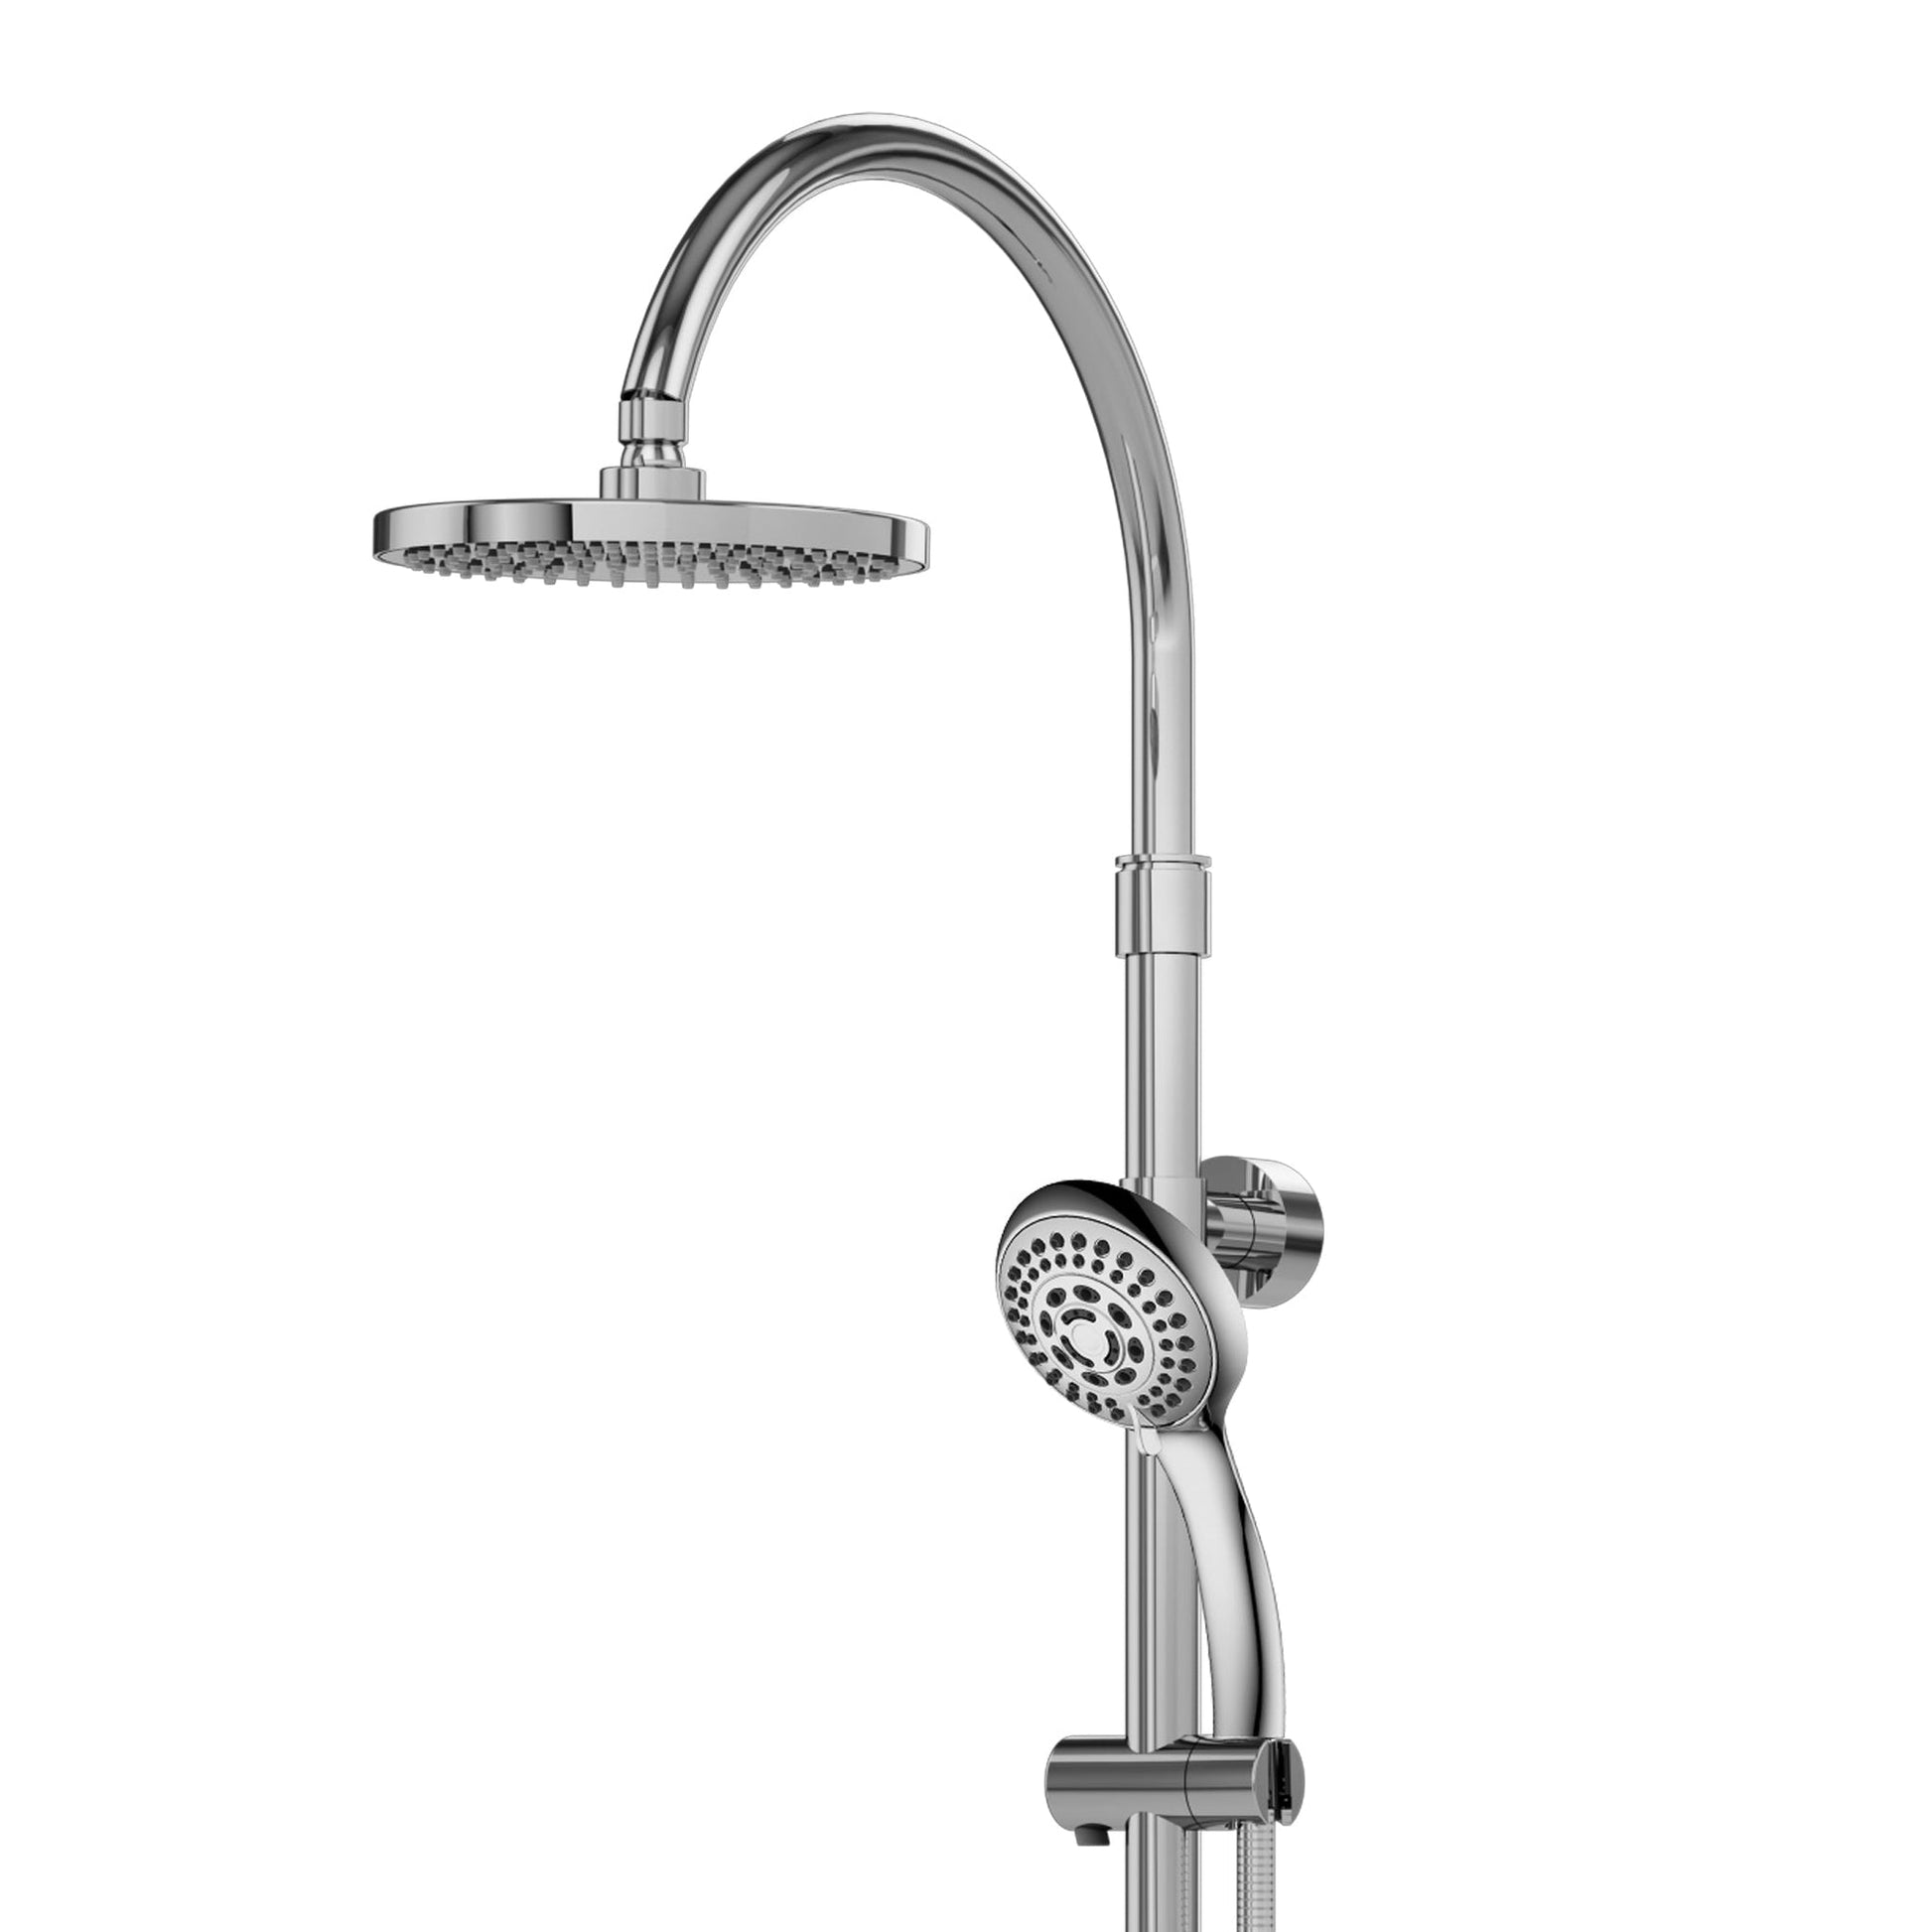 PULSE ShowerSpas Riviera Rain Shower System in Chrome Finish 2.5 GPM With 5-Function Hand Shower